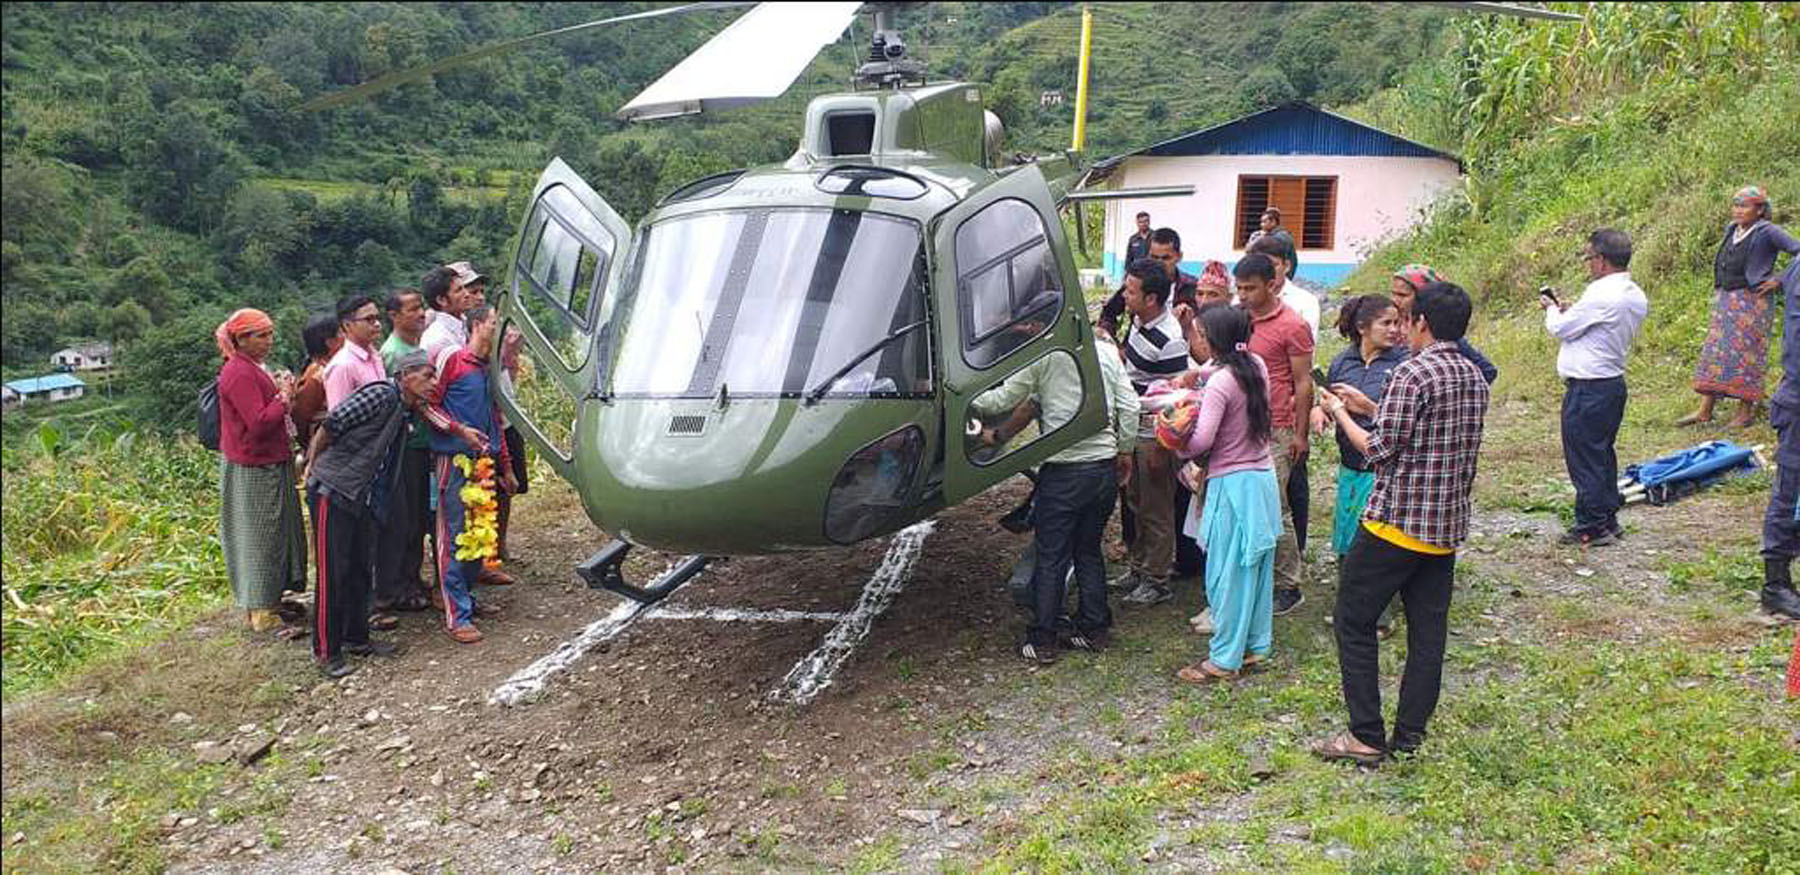 Pregnant women rescued by helicopter